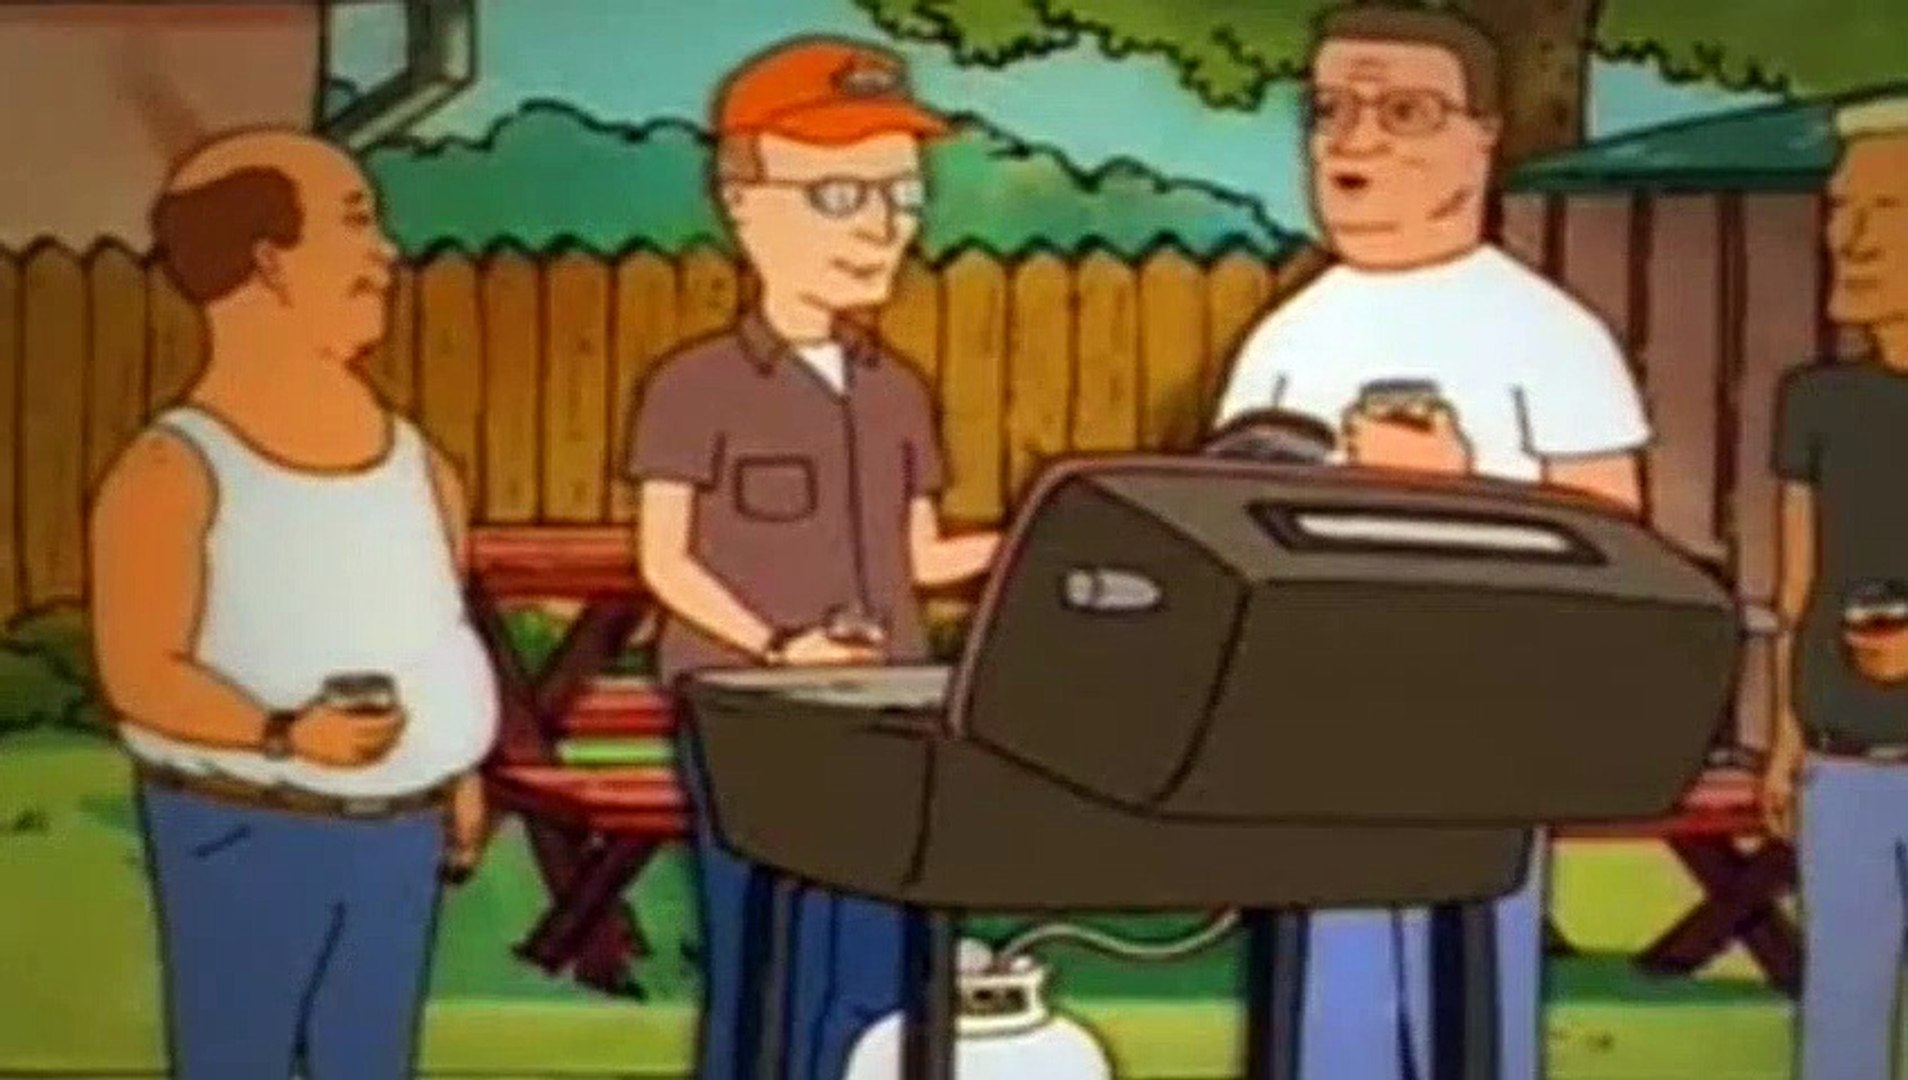 King of the Hill Season 2 by King of the Hill - Dailymotion